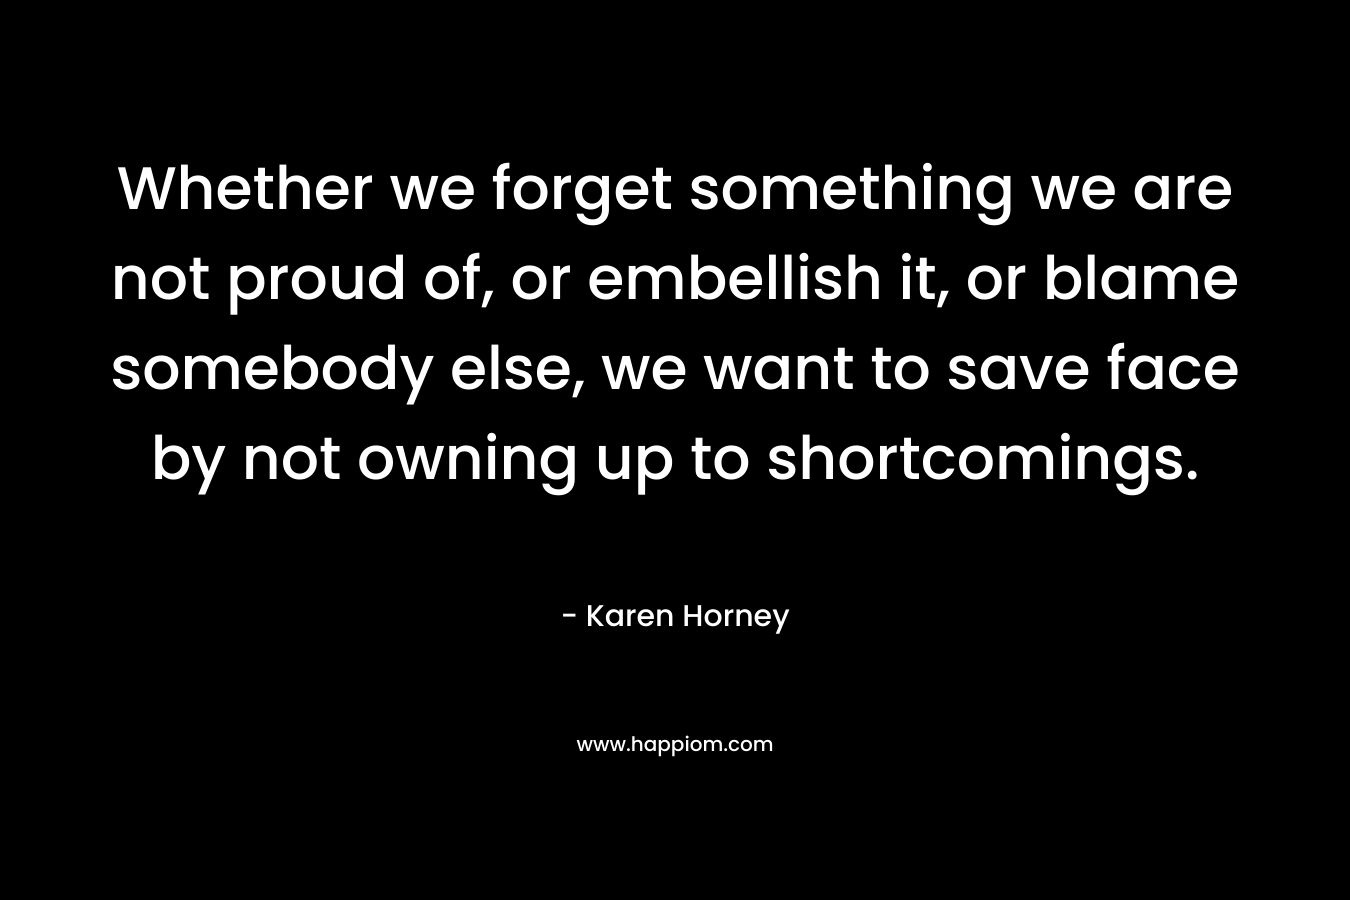 Whether we forget something we are not proud of, or embellish it, or blame somebody else, we want to save face by not owning up to shortcomings. – Karen Horney